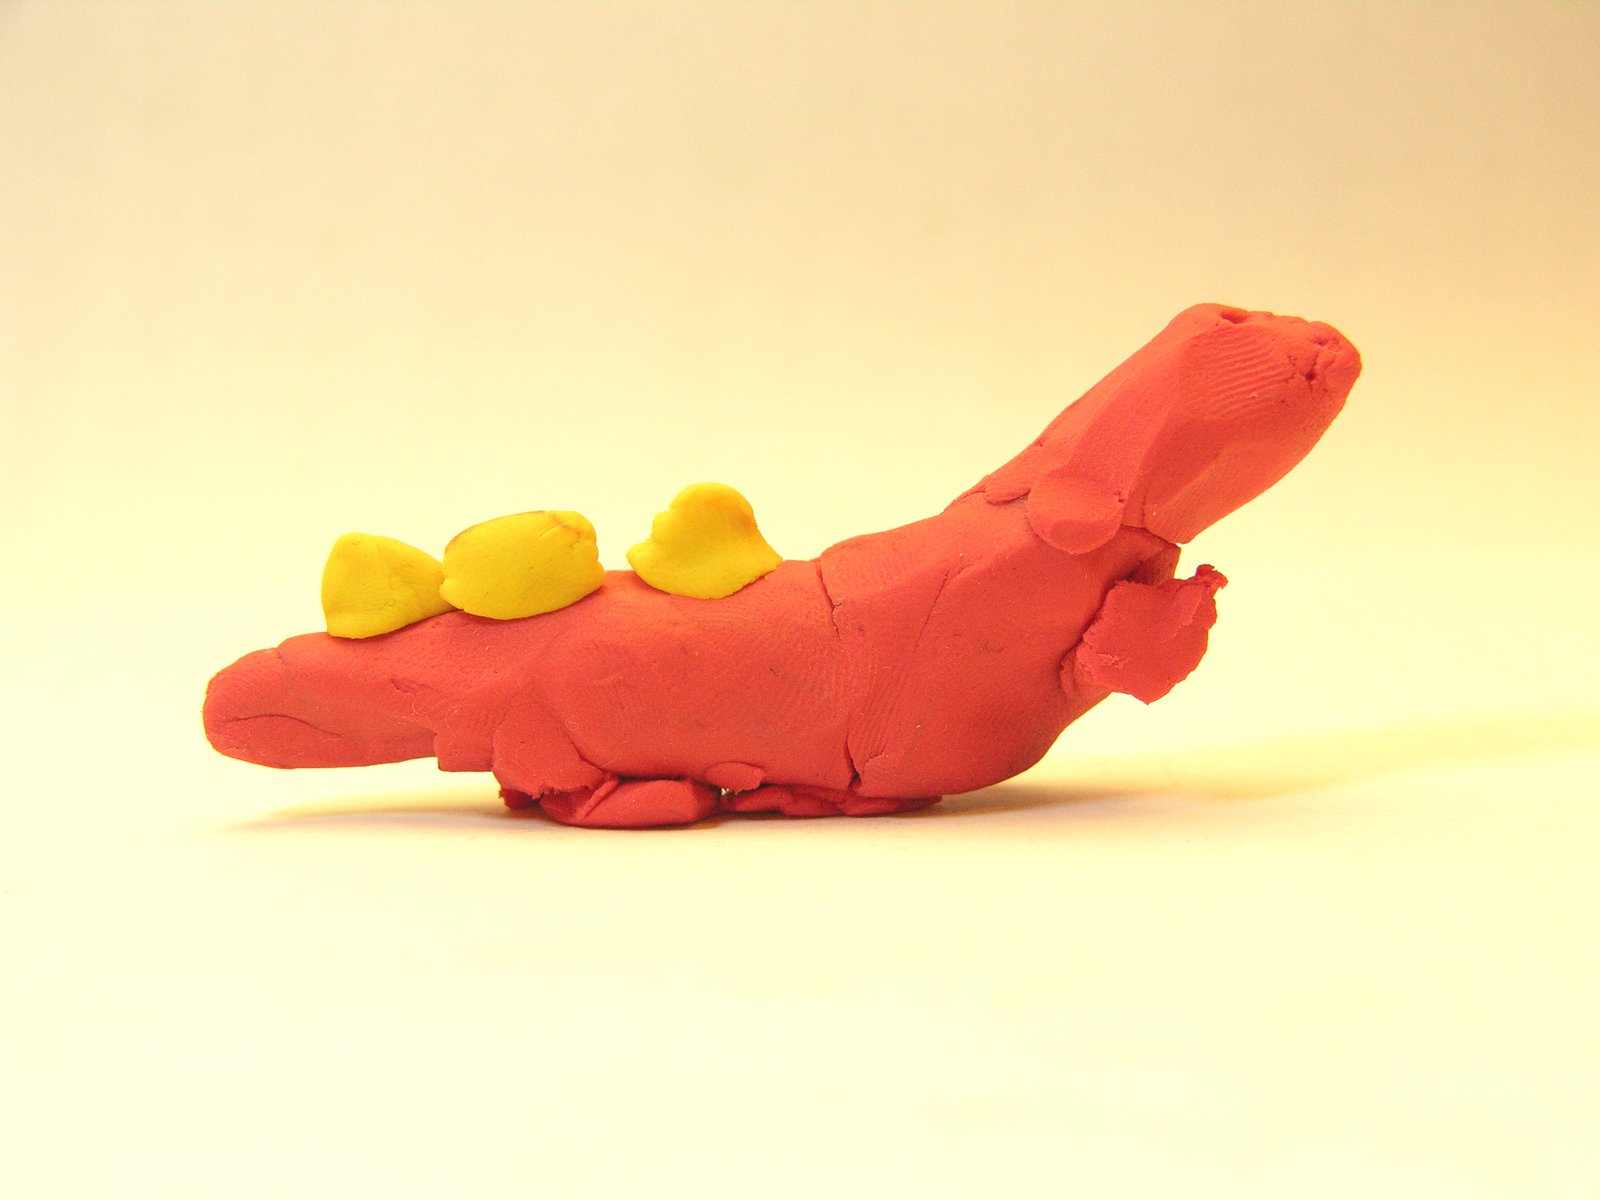 the toy alligator with two birds sits on a white background